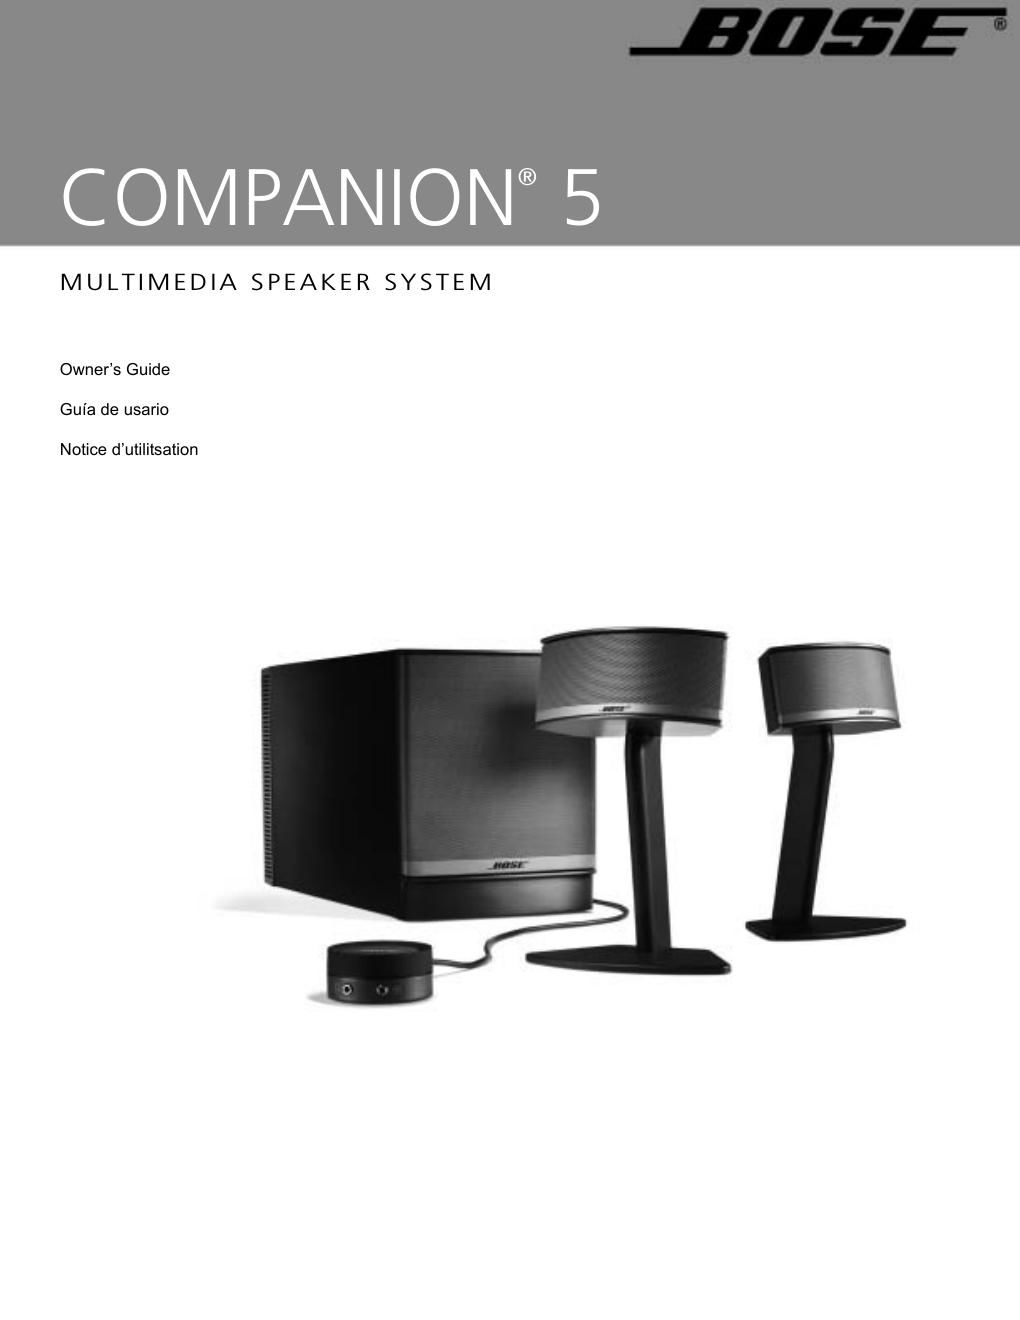 bose companion 5 owners guide